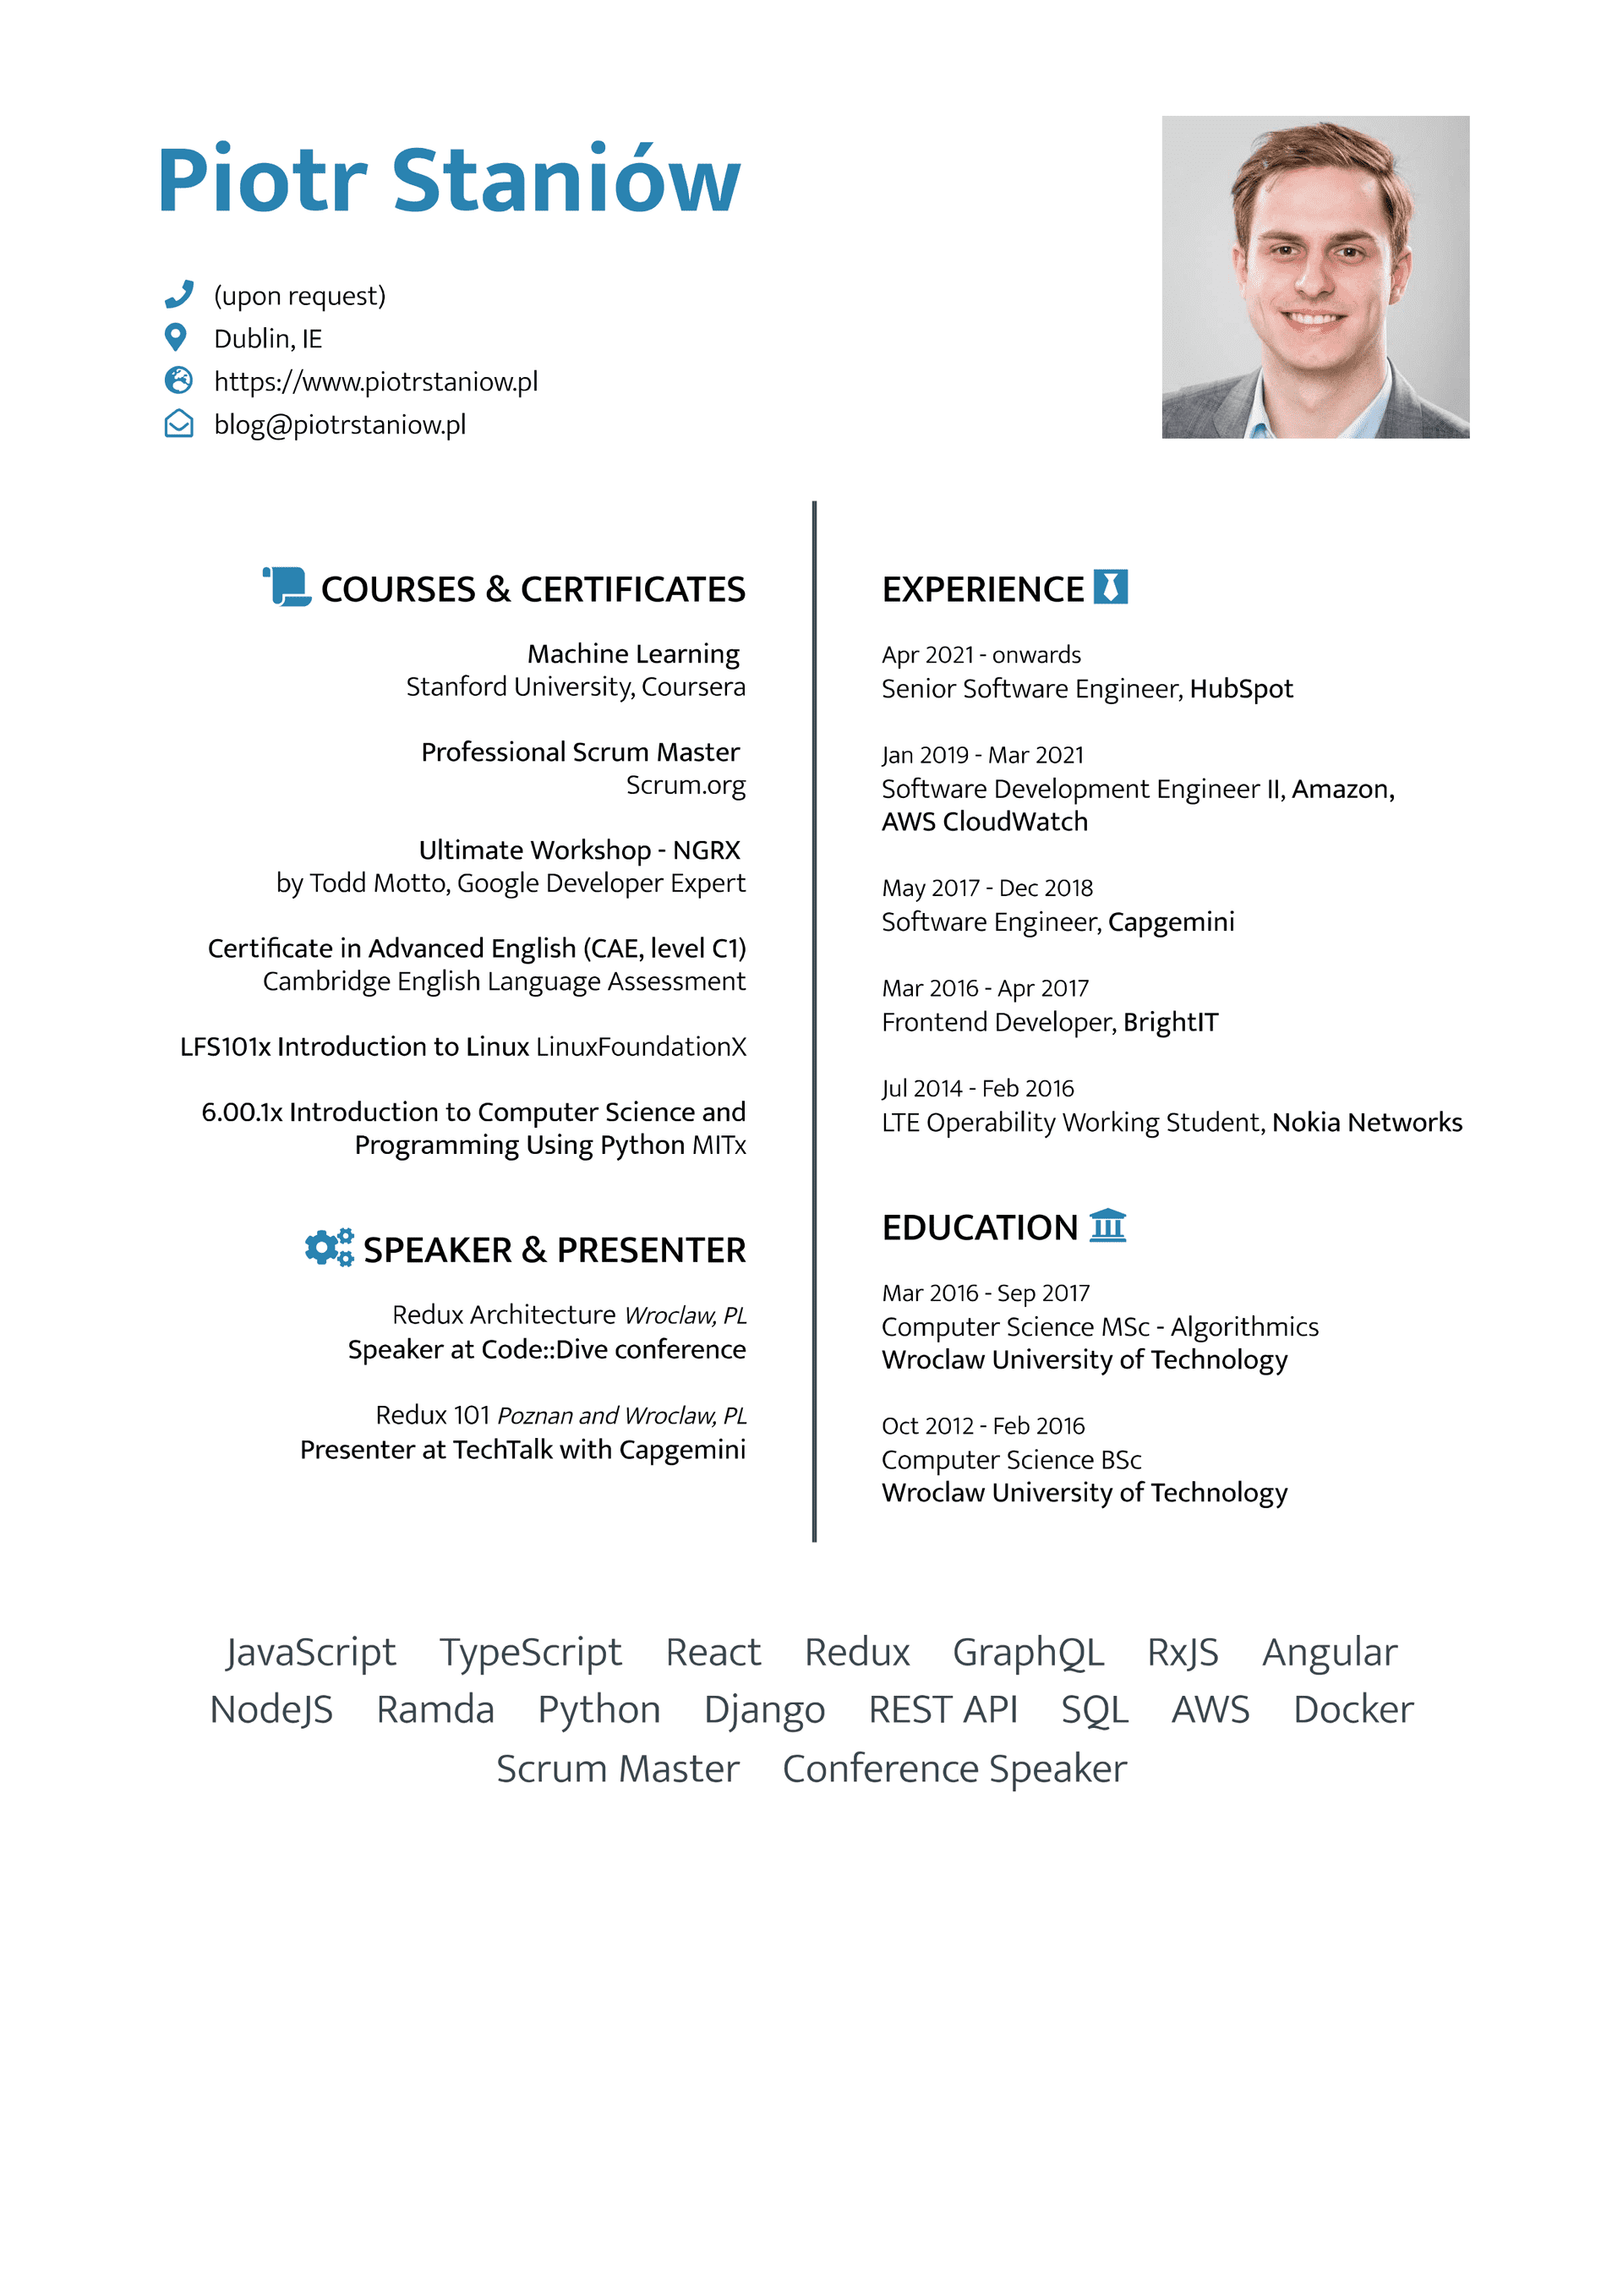 Image of the resume - Download PDF button is available